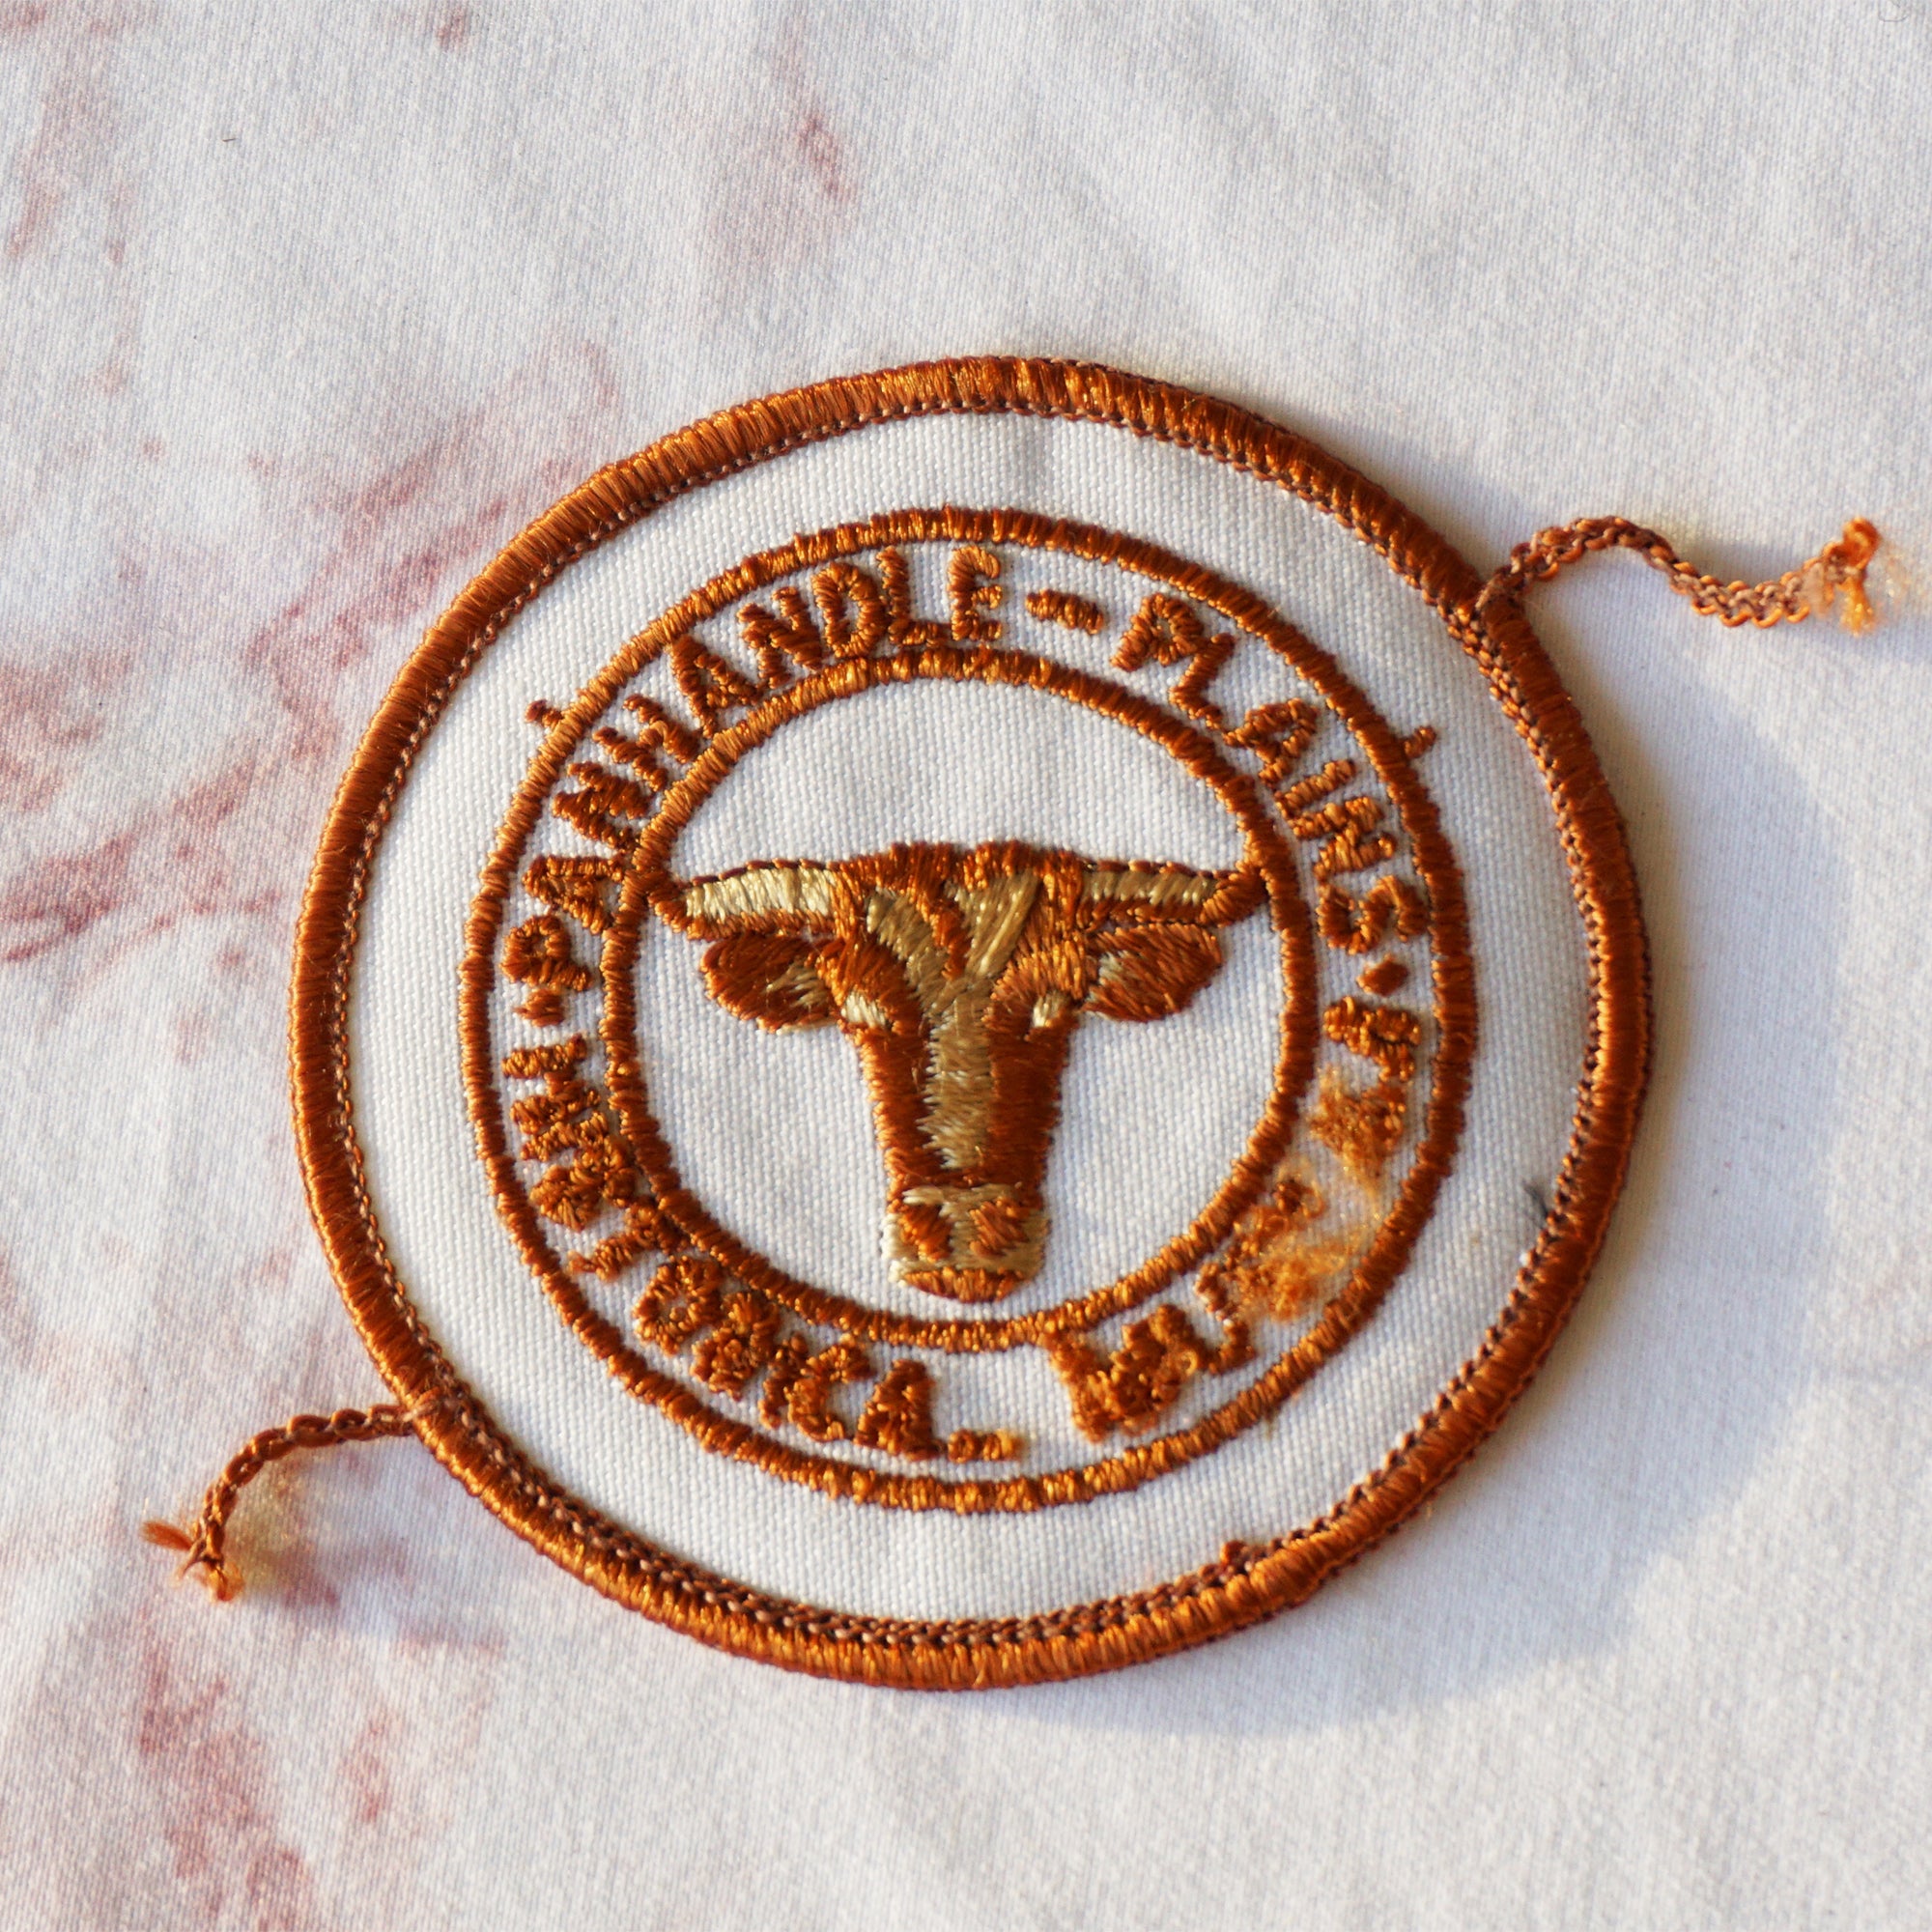 1980s Vintage 4" Panhandle-Plains HIstorical Museum Clothing Patch with Cow. Brown and White Colors.